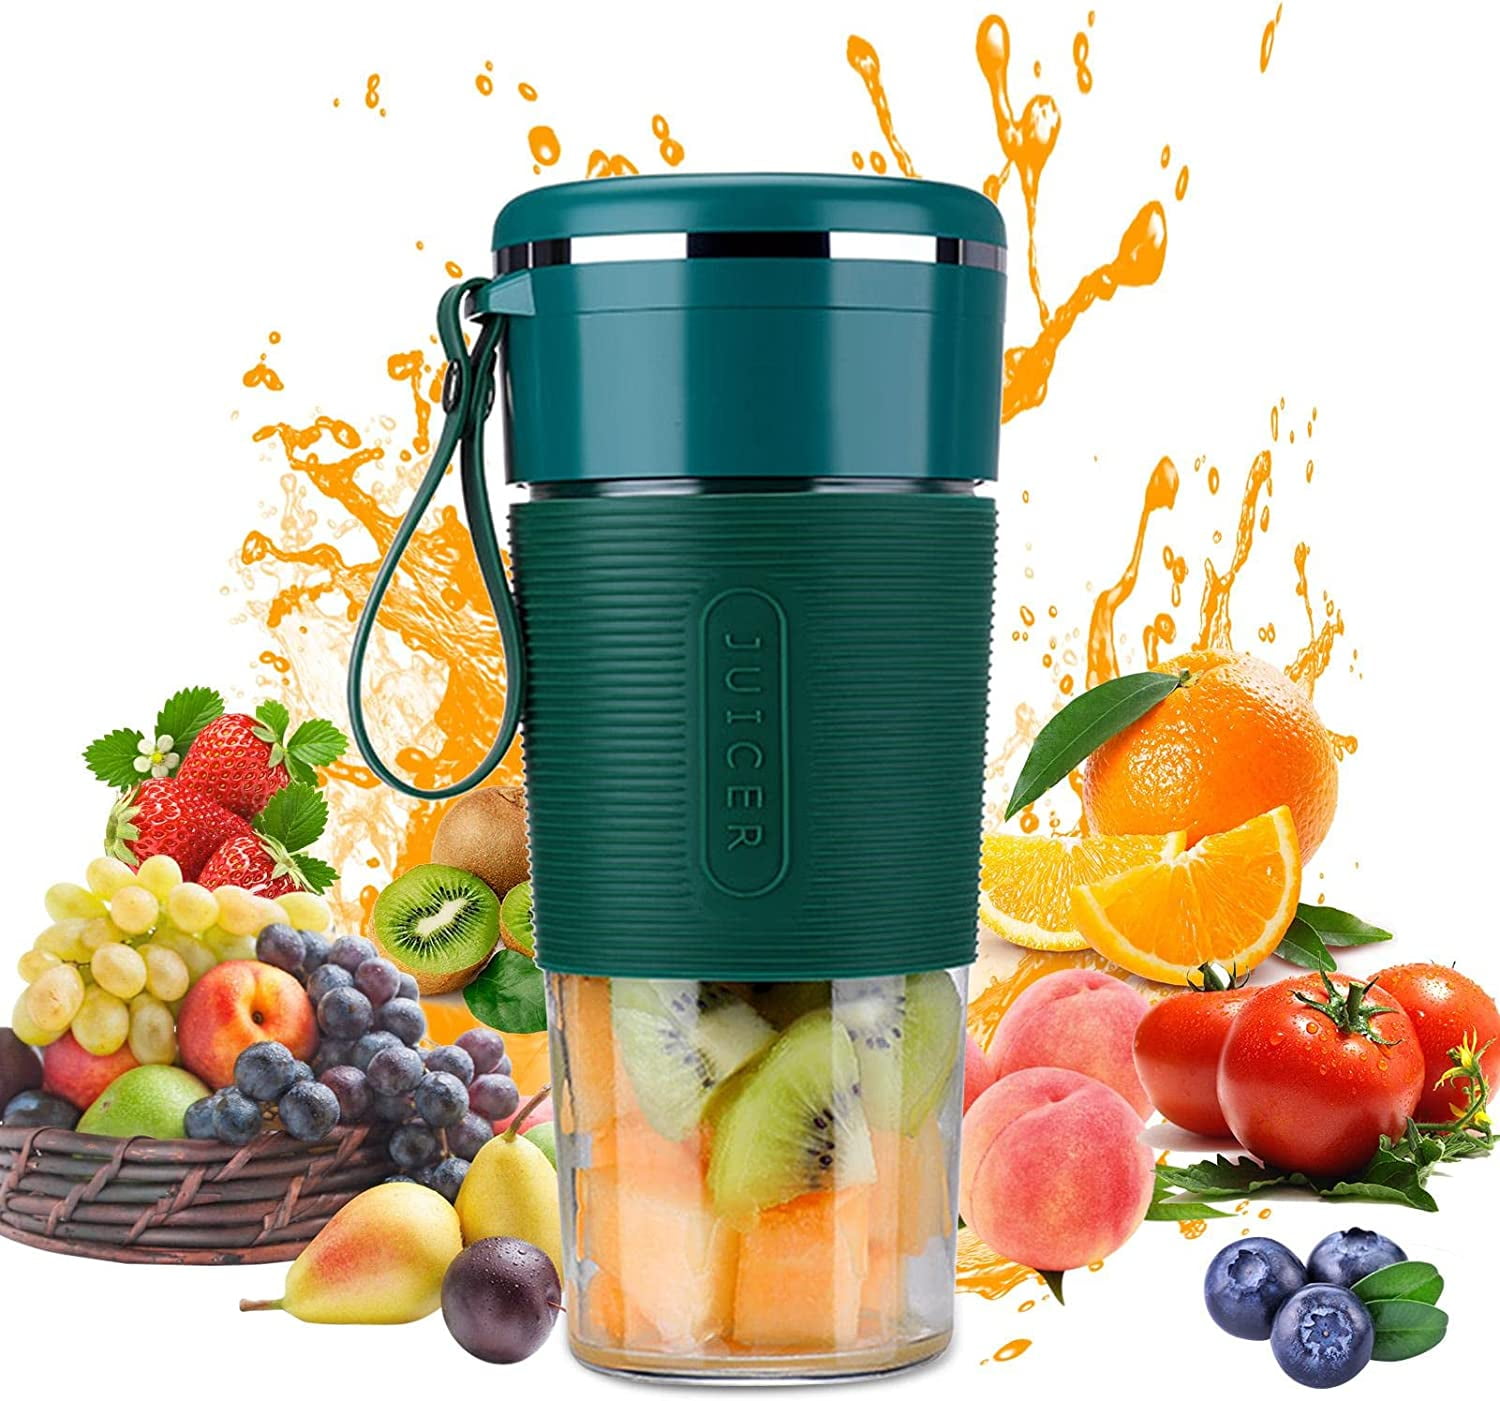 HOOFUN Portable Blender Portable Juicer, Personal Size Blender Smoothies and Shakes, 6 Blade Blender, Travel Juicer, USB Charging Portable Juicer (300ML) Handheld Blender Sports Travel and Home